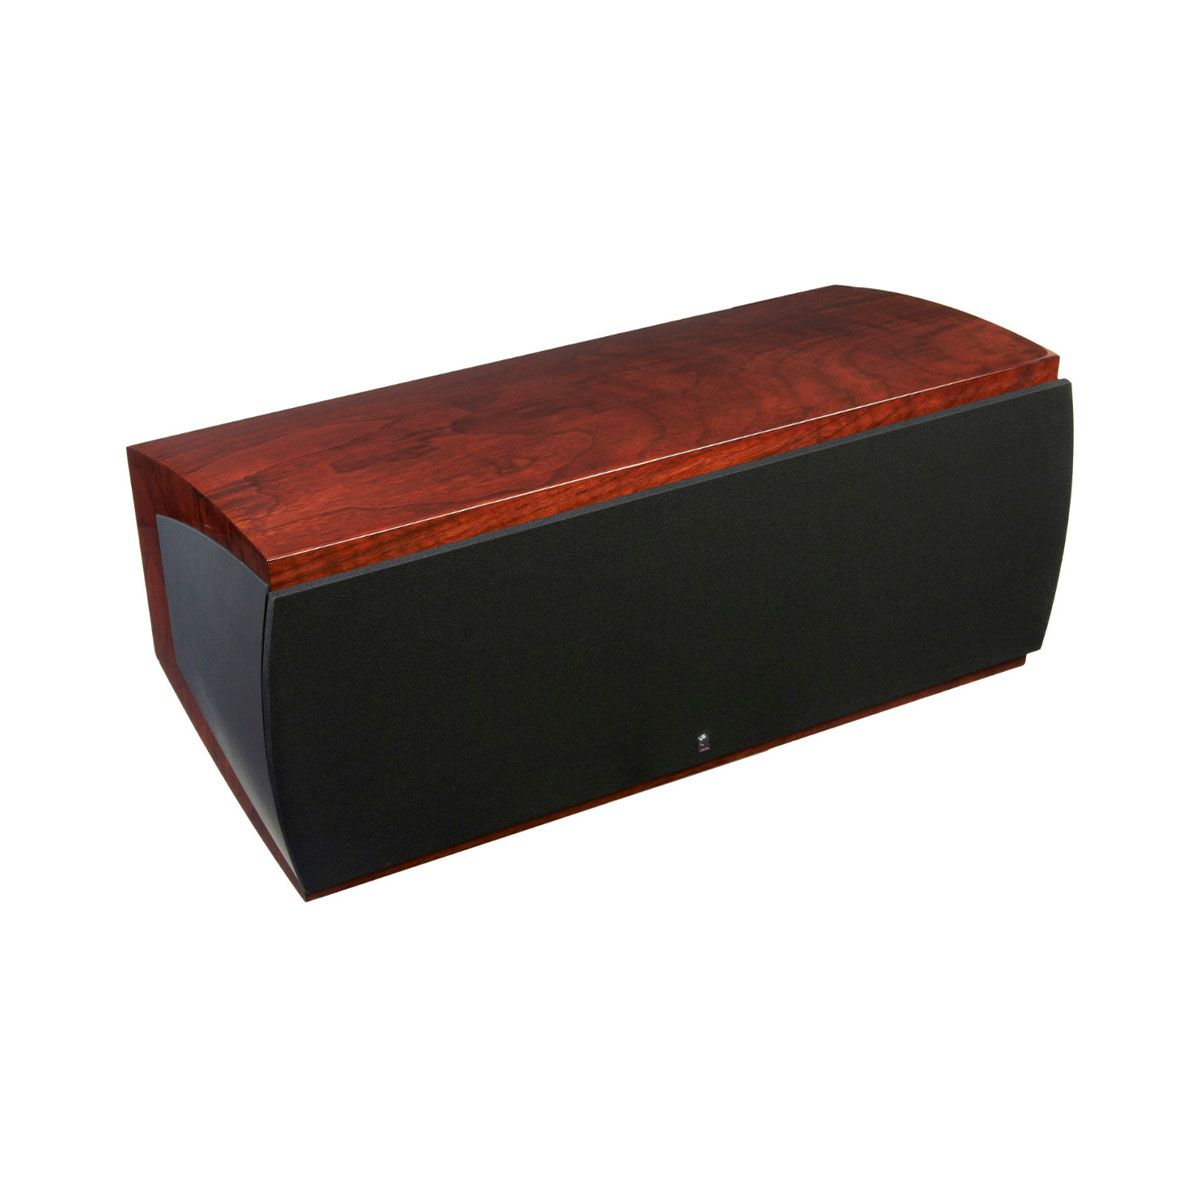 Revel C208 3-way Center Channel Loudspeaker - Walnut with grille - angled front view